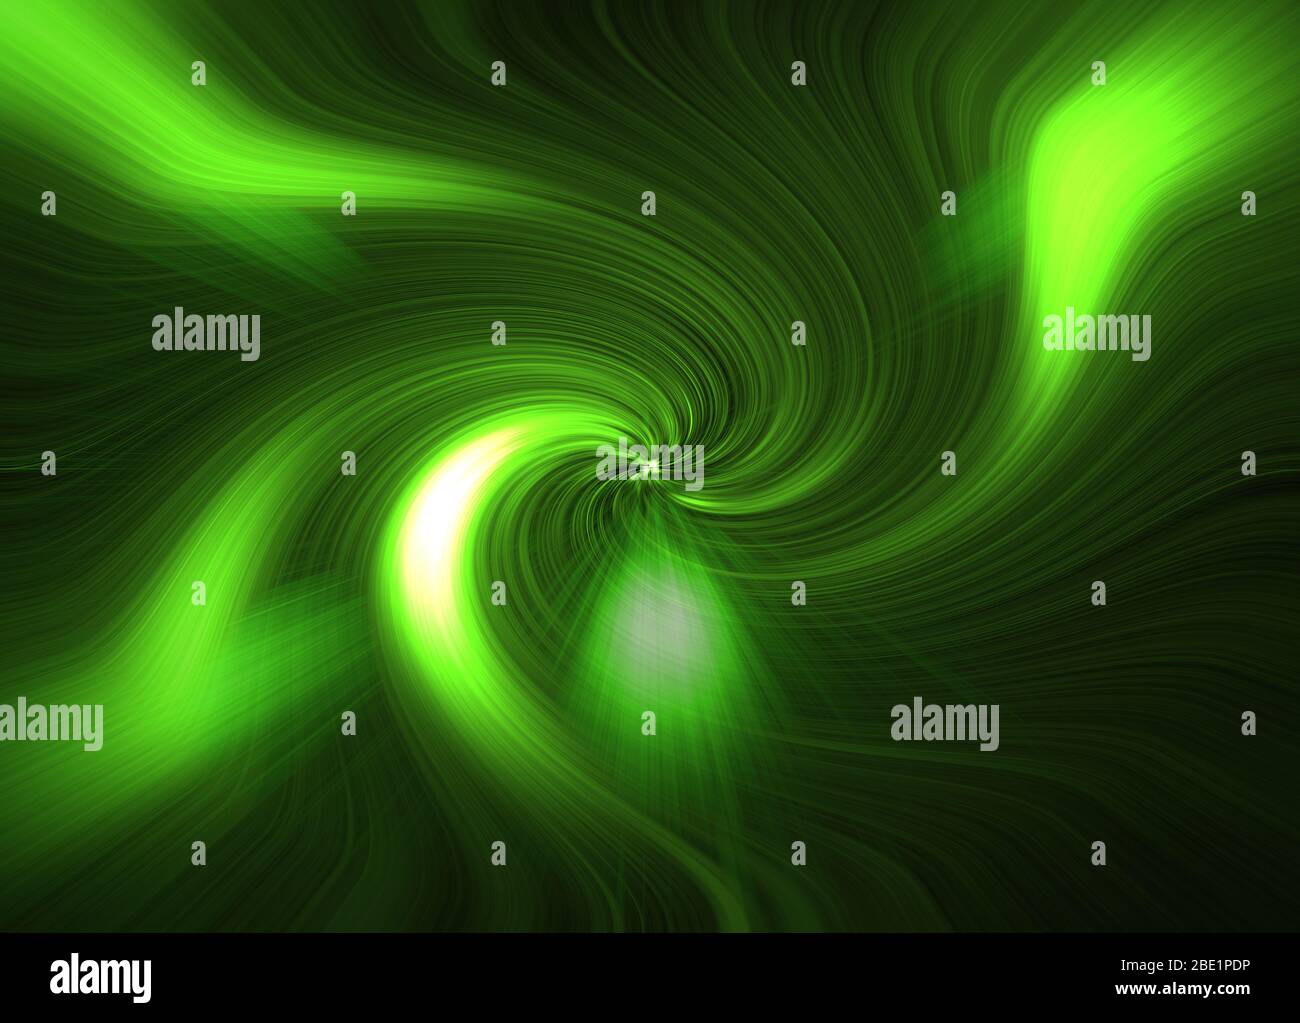 Hd abstract green fractal background abstract green background with lines abstract green swirl wallpaper green lights on abstract background stock photo